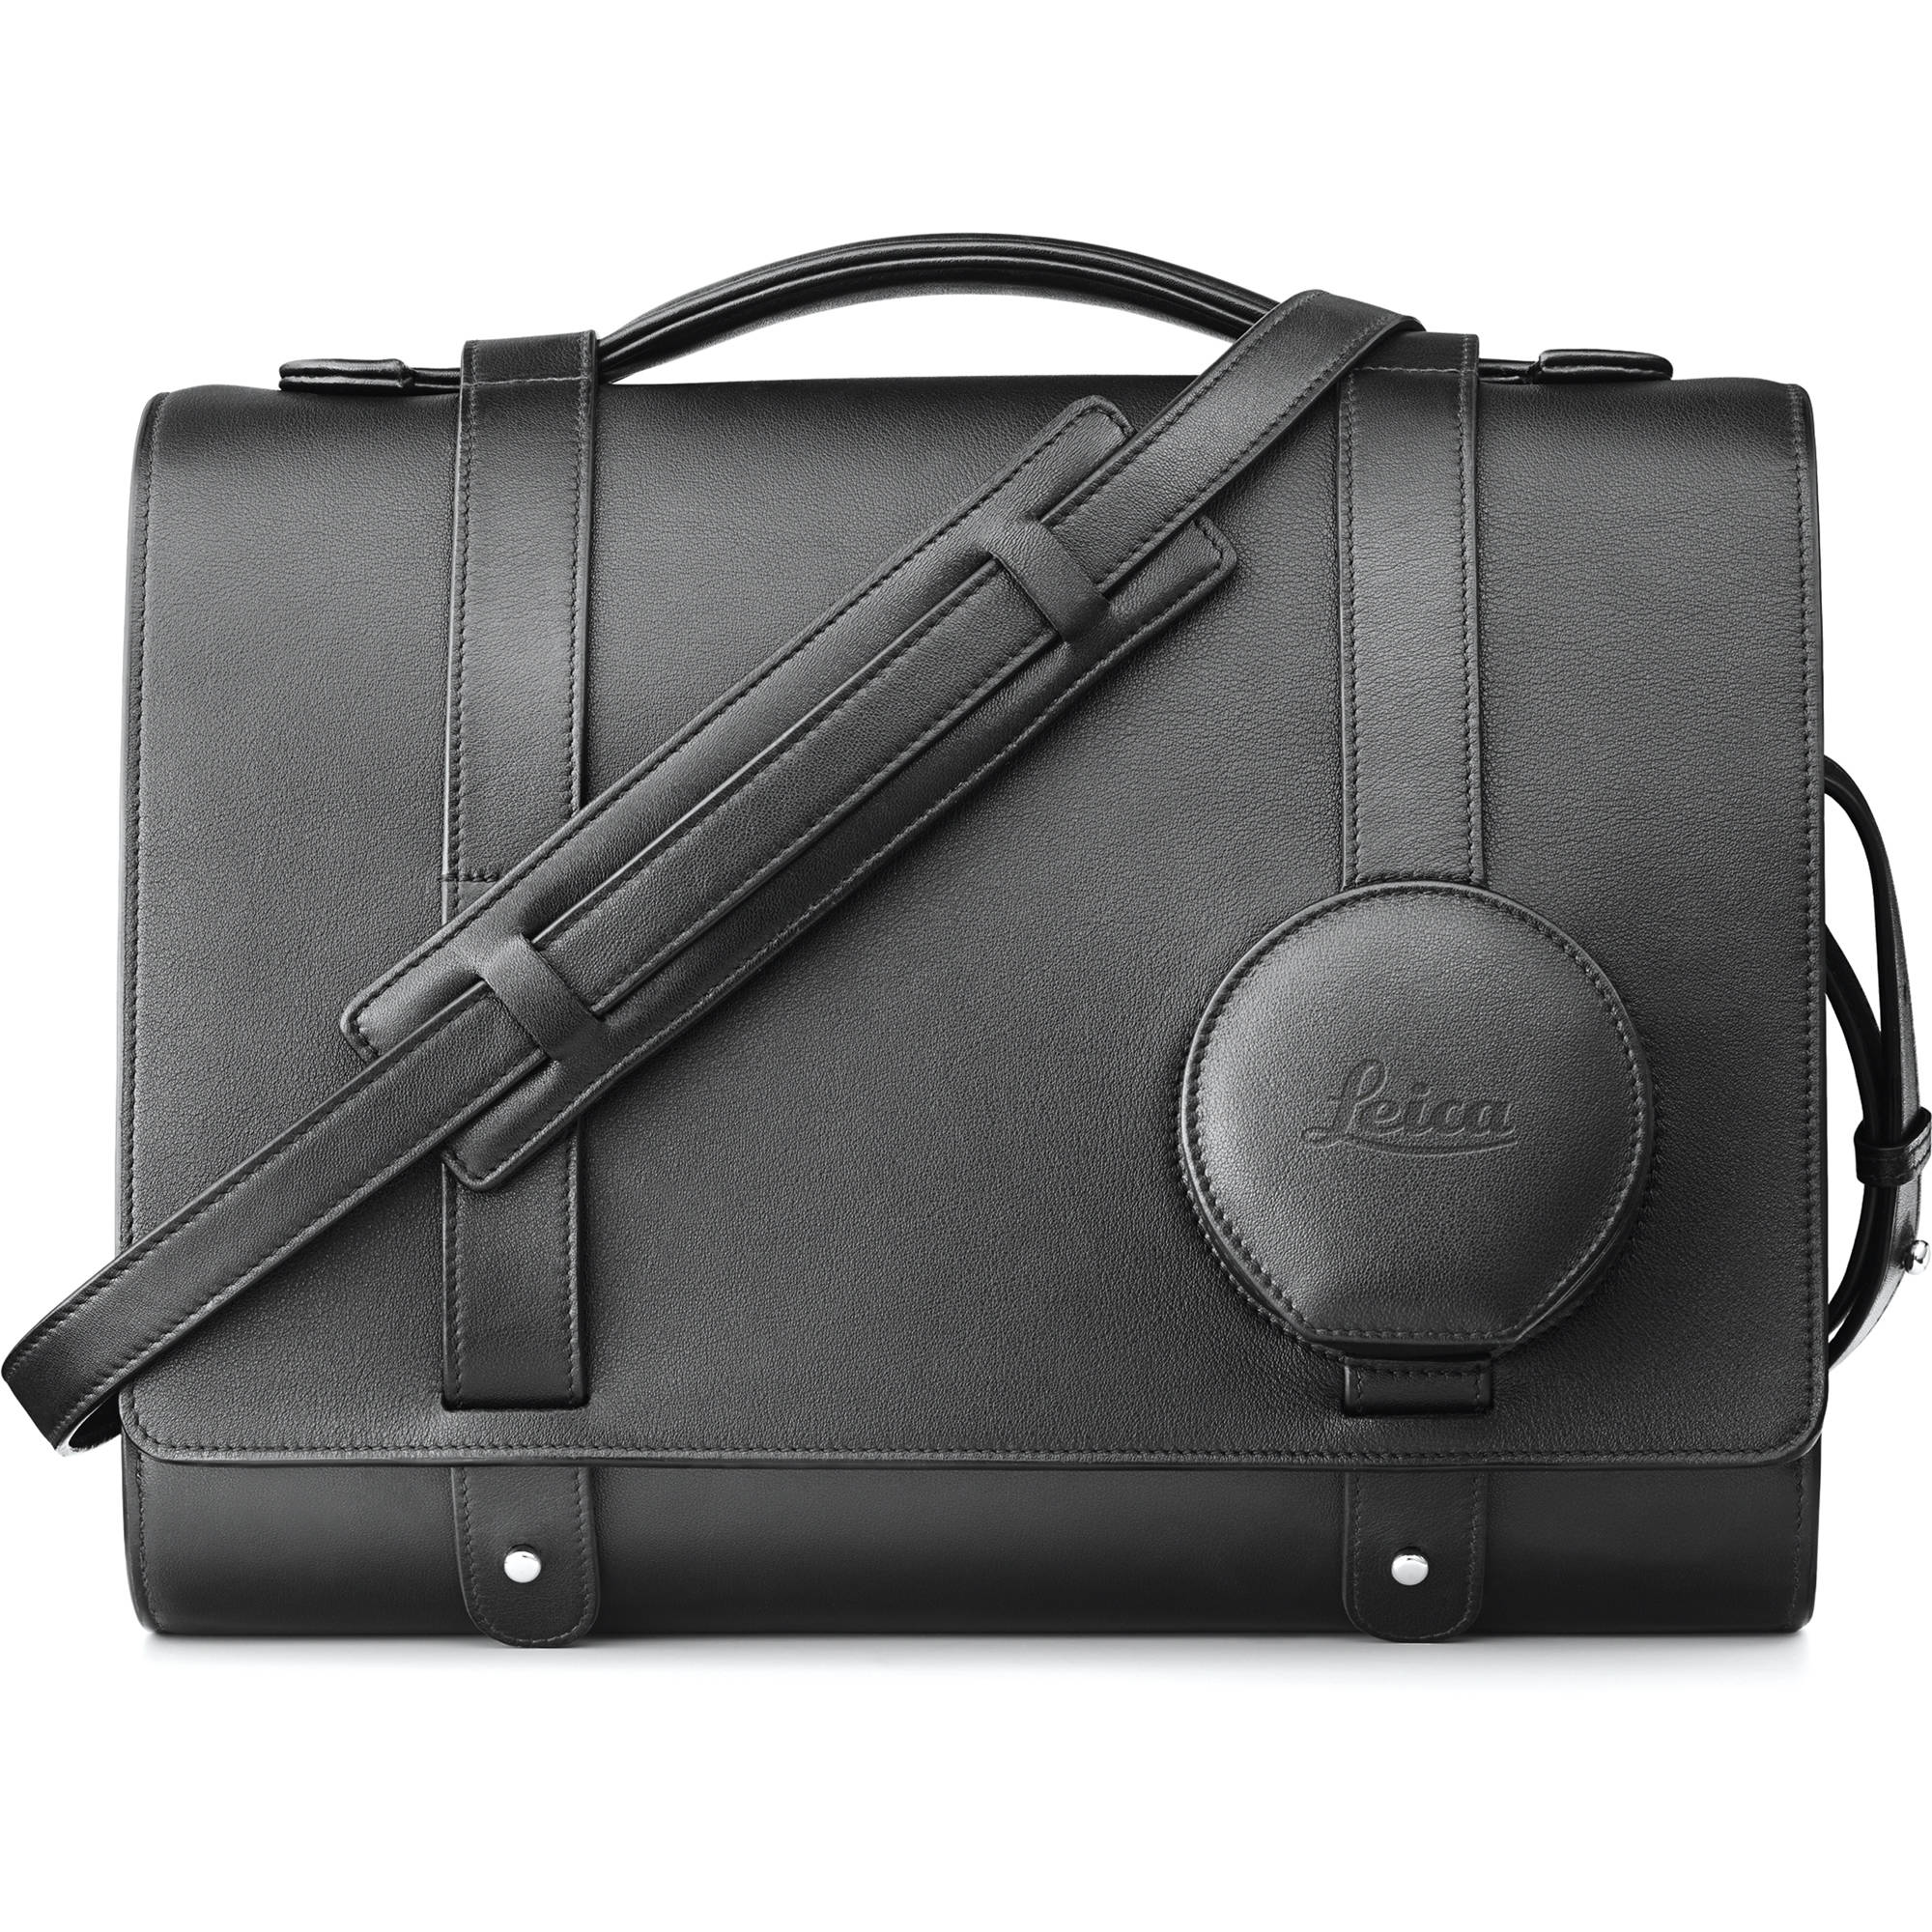 tripod carrying case